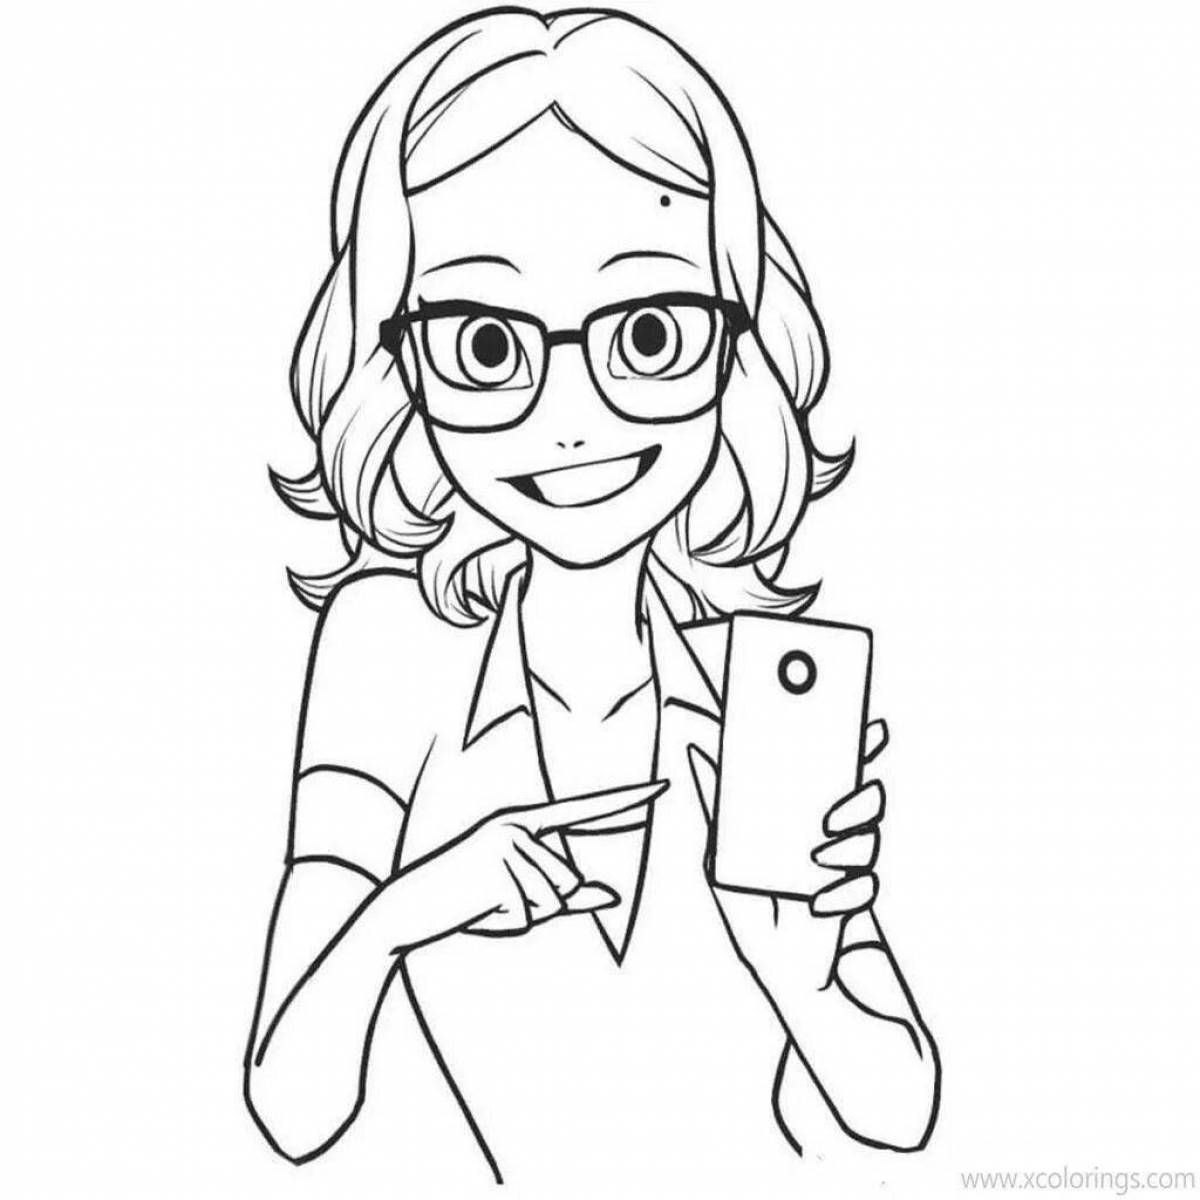 Chloe bourgeois coloring page